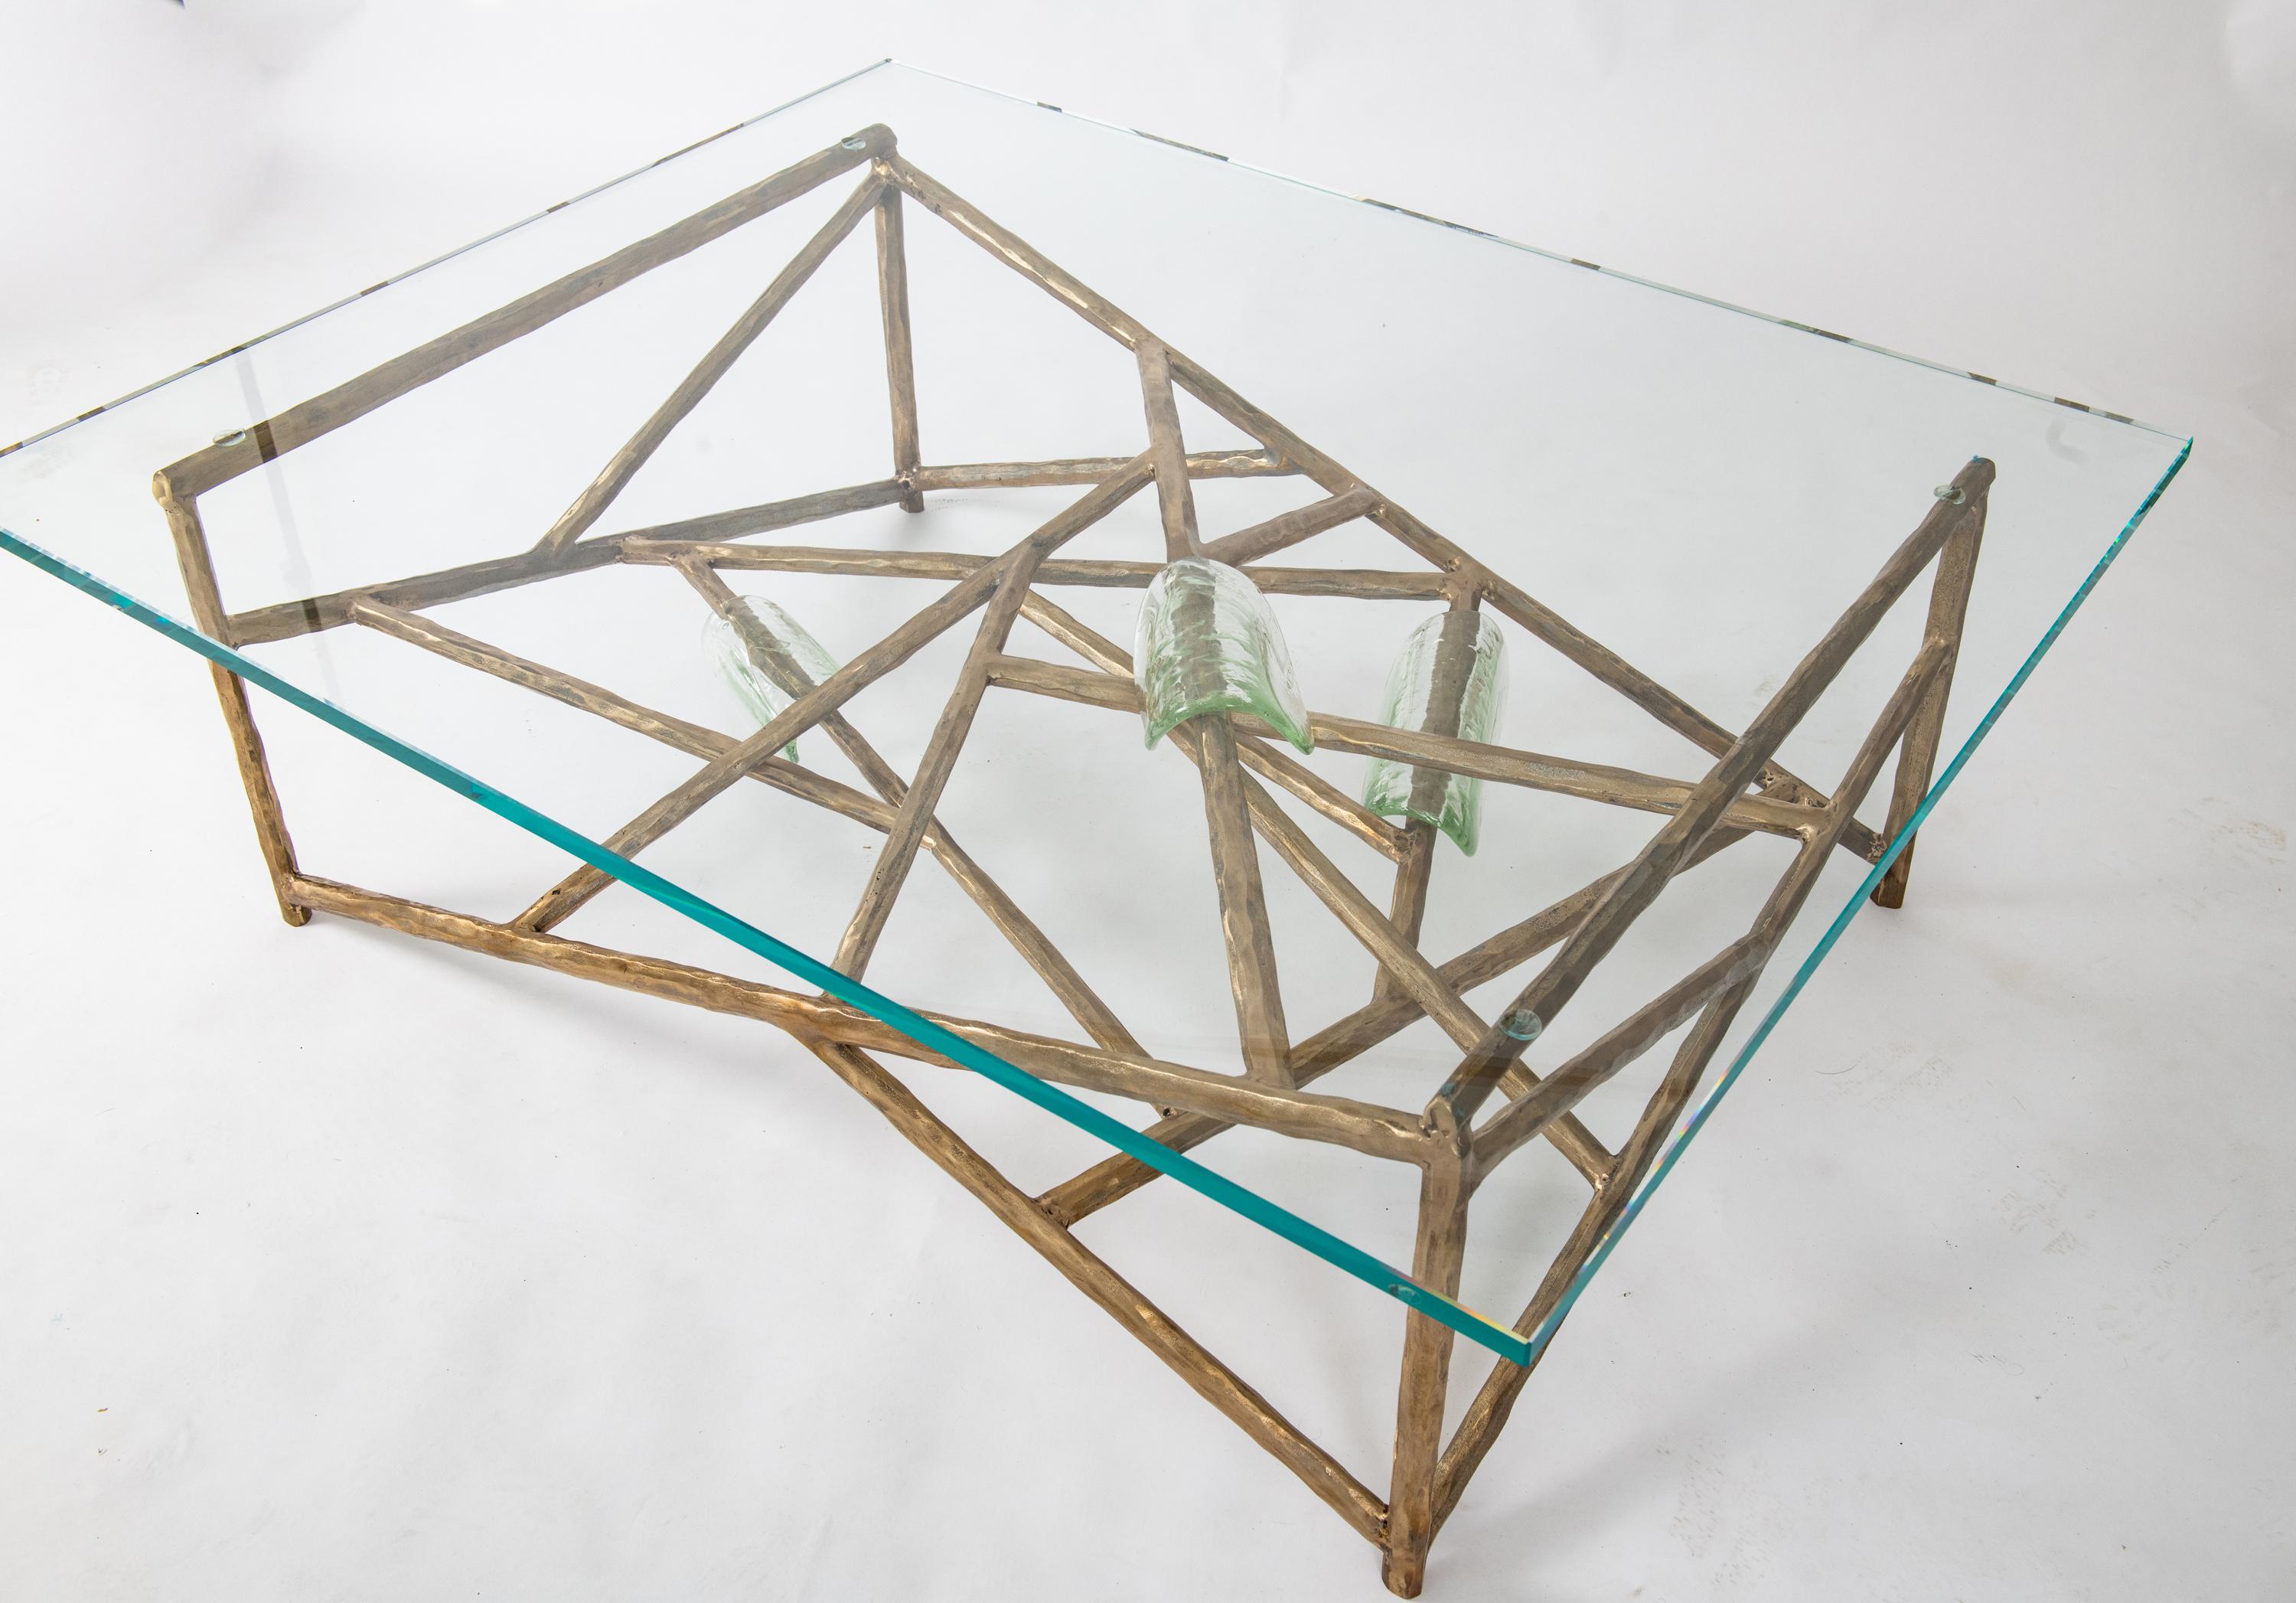 Gregory Nangle
Constraint table, 2021
Cast bronze and glass
Measures: 17 x 50 x 40 in.